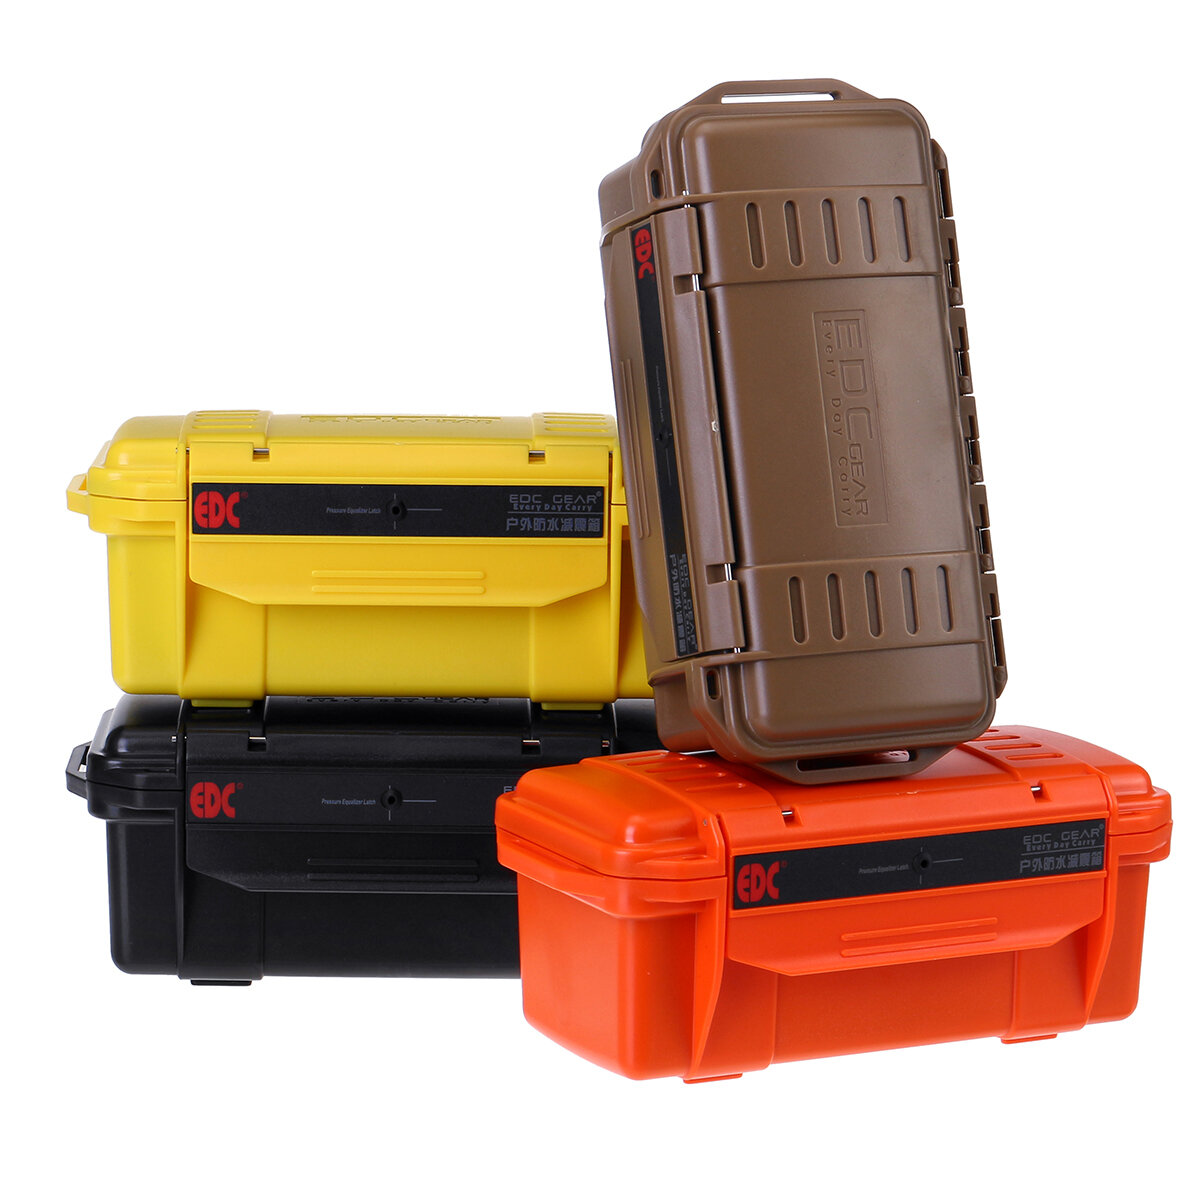 

Outdoor Sponge Storage Carry Box Container Shockproof 100% Waterproof Plastic Carrying Case